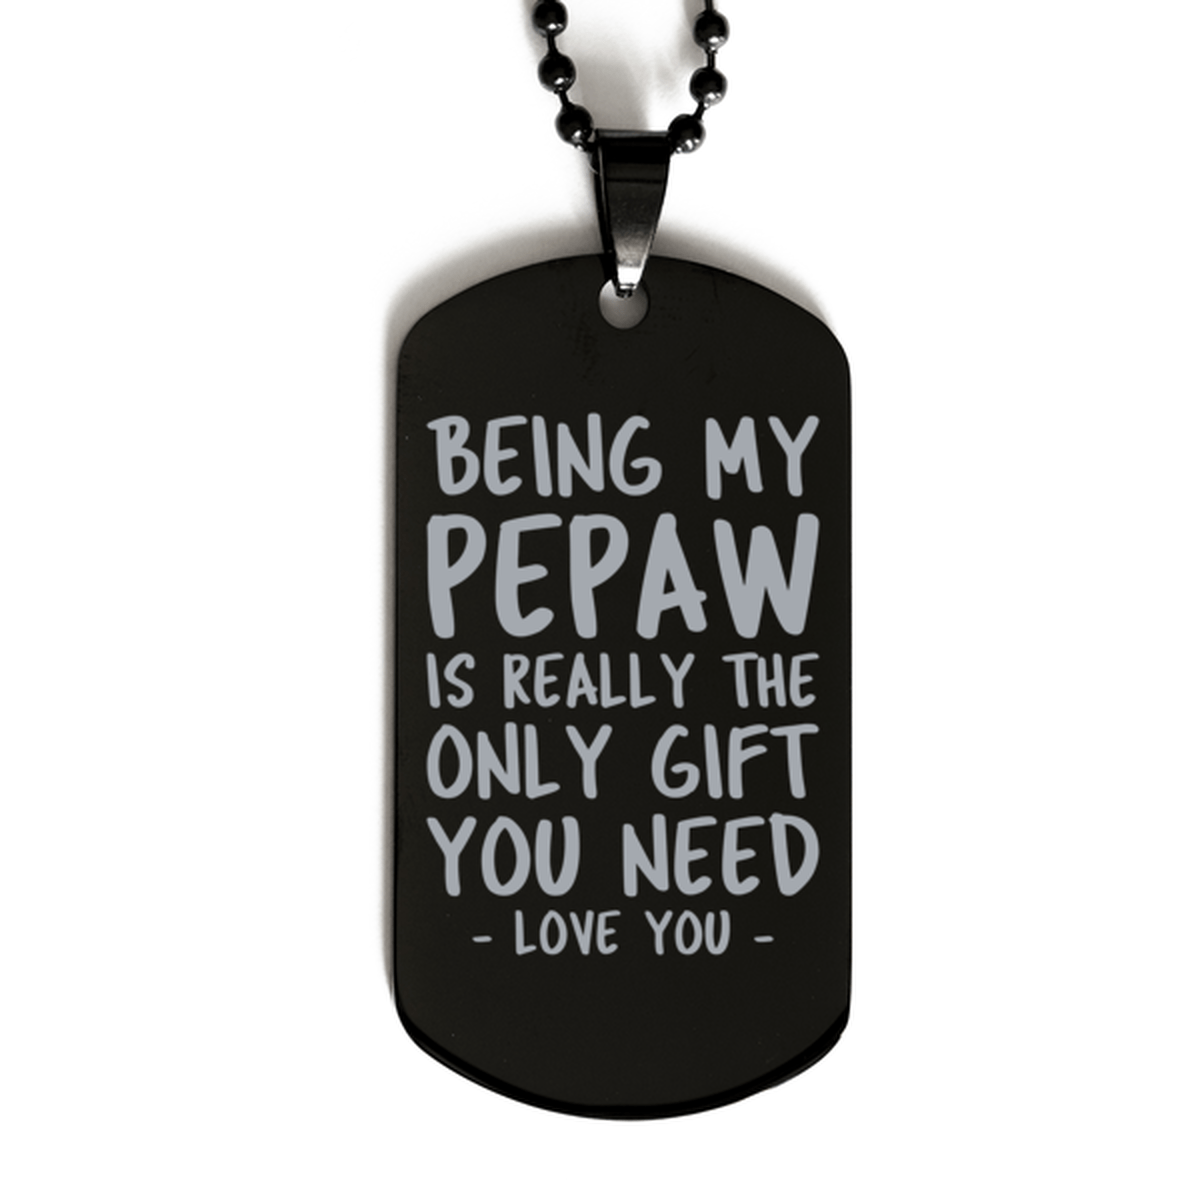 Funny Pepaw Black Dog Tag Necklace, Being My Pepaw Is Really the Only Gift You Need, Best Birthday Gifts for Pepaw